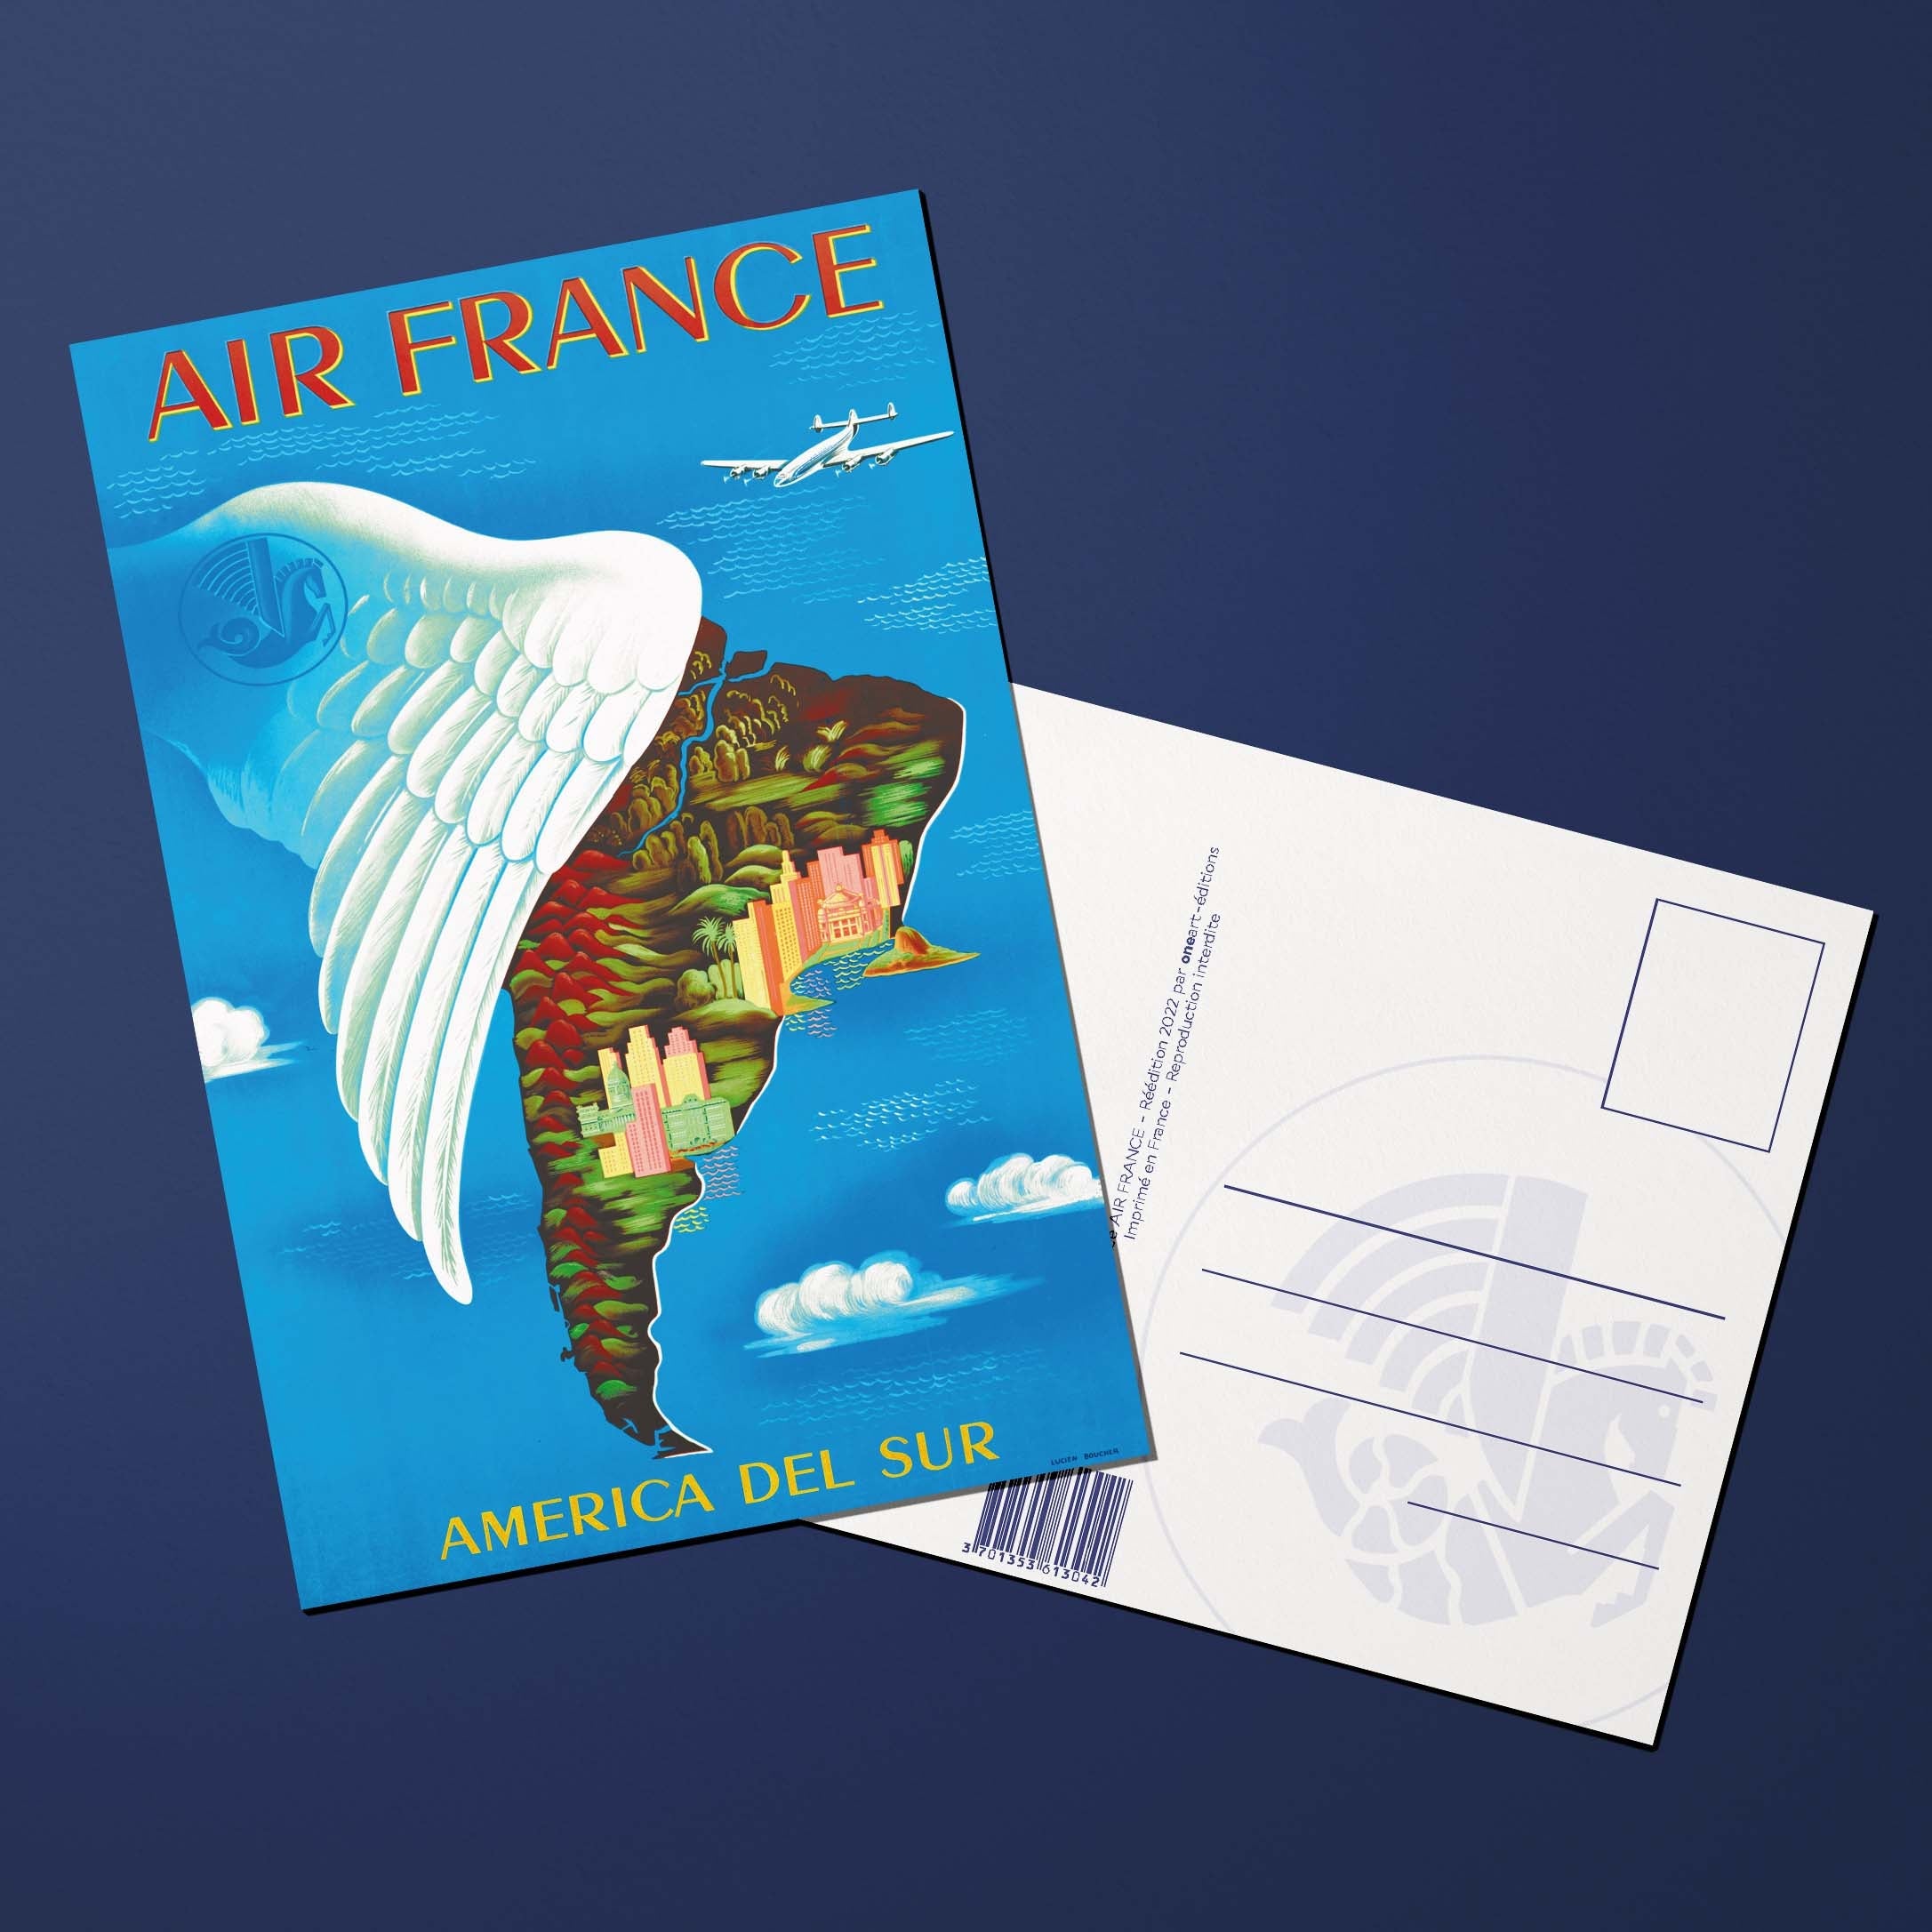 Air France Legend America del Sur postcard, mountain range and wing